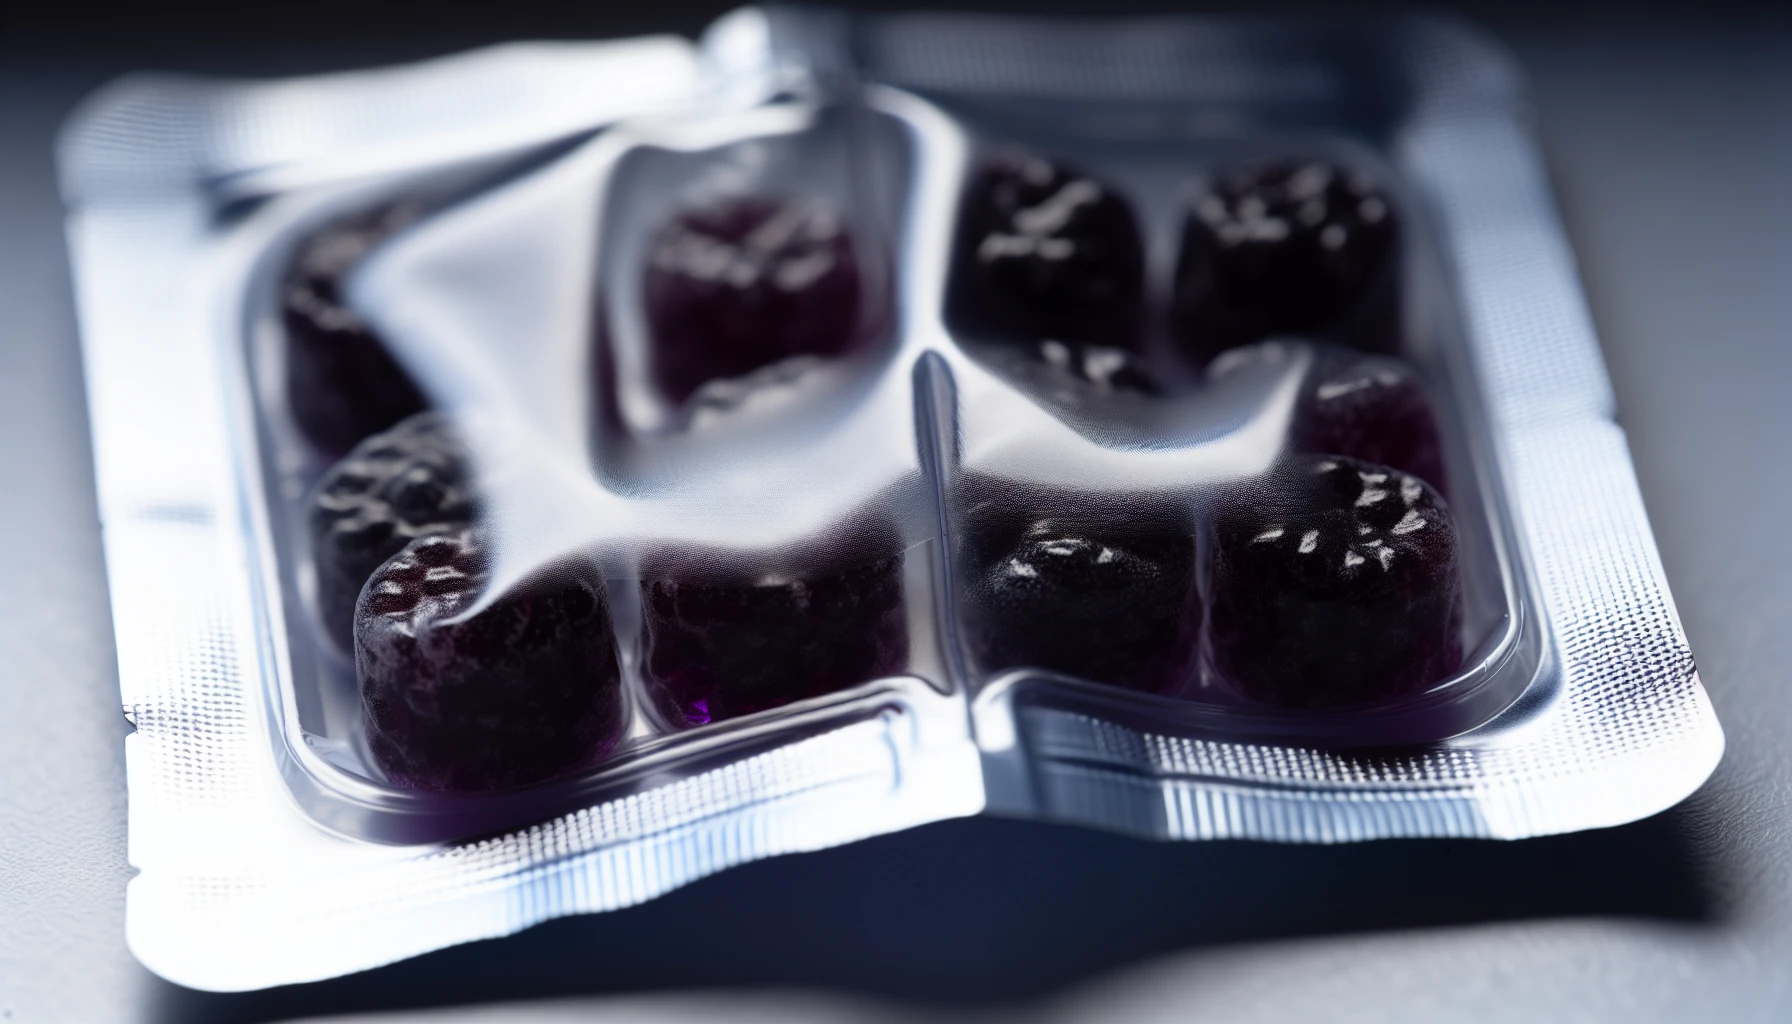 Elderberry syrup bites in a convenient pack